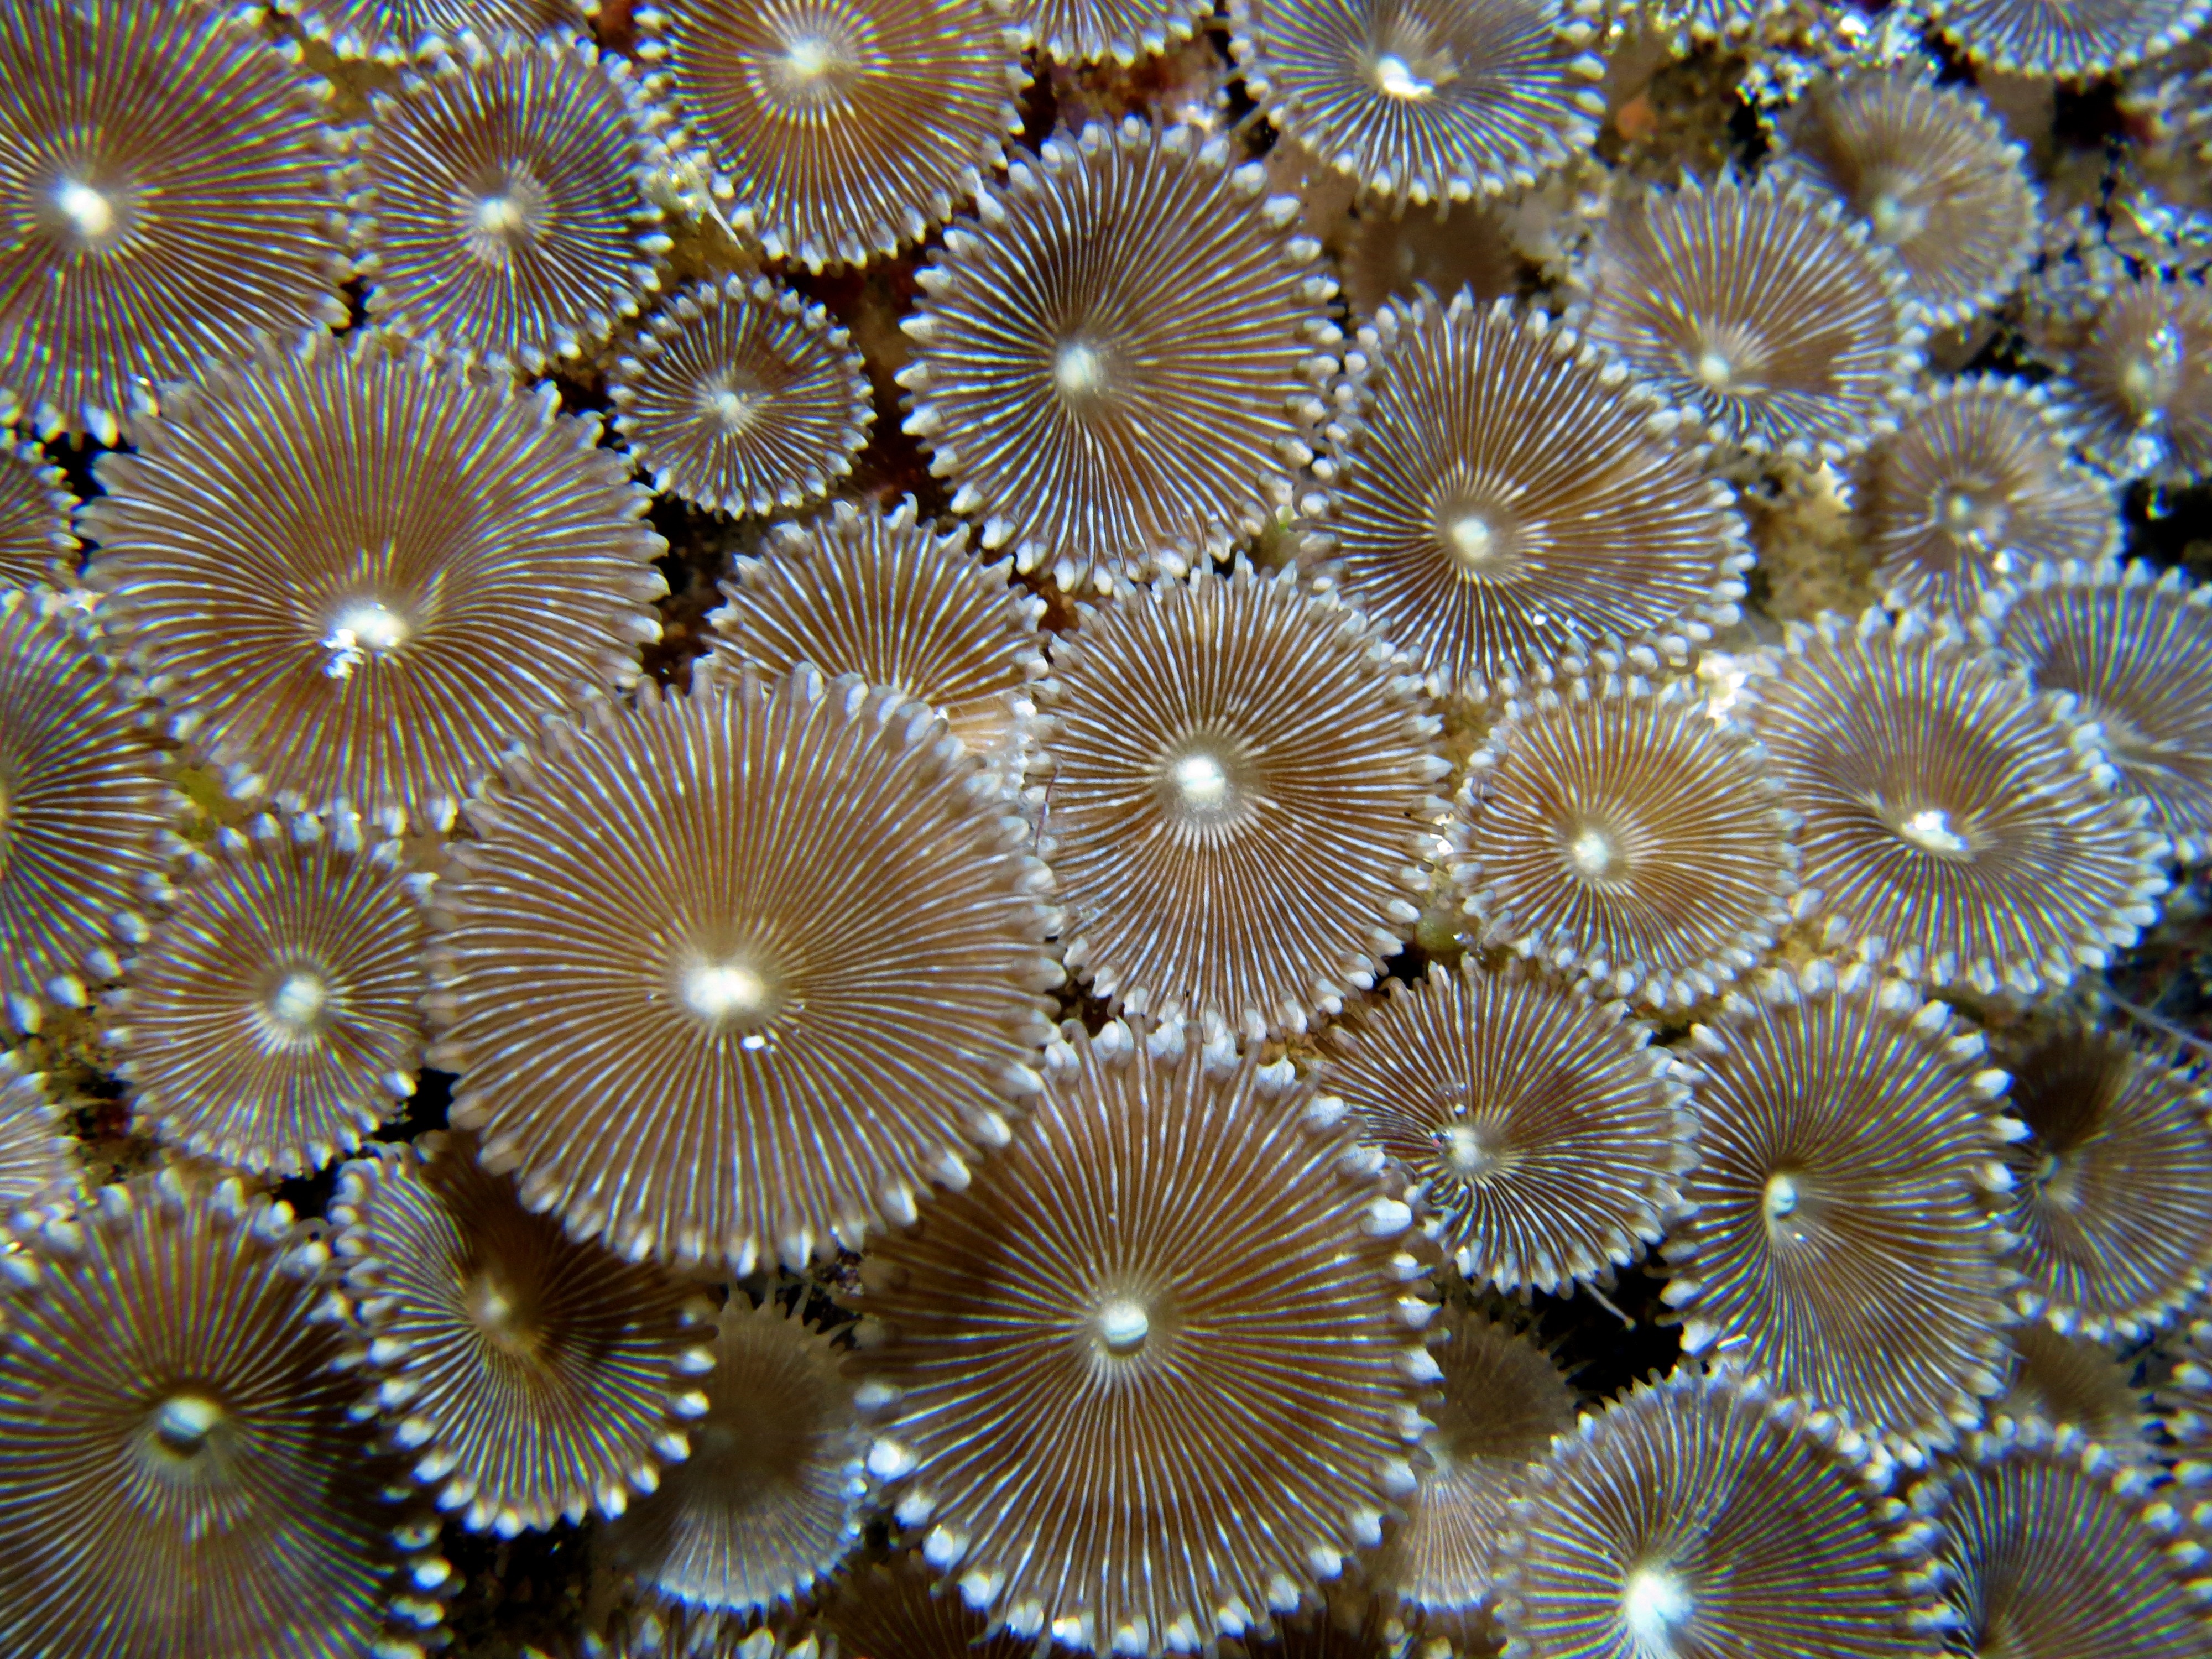 brown corals like